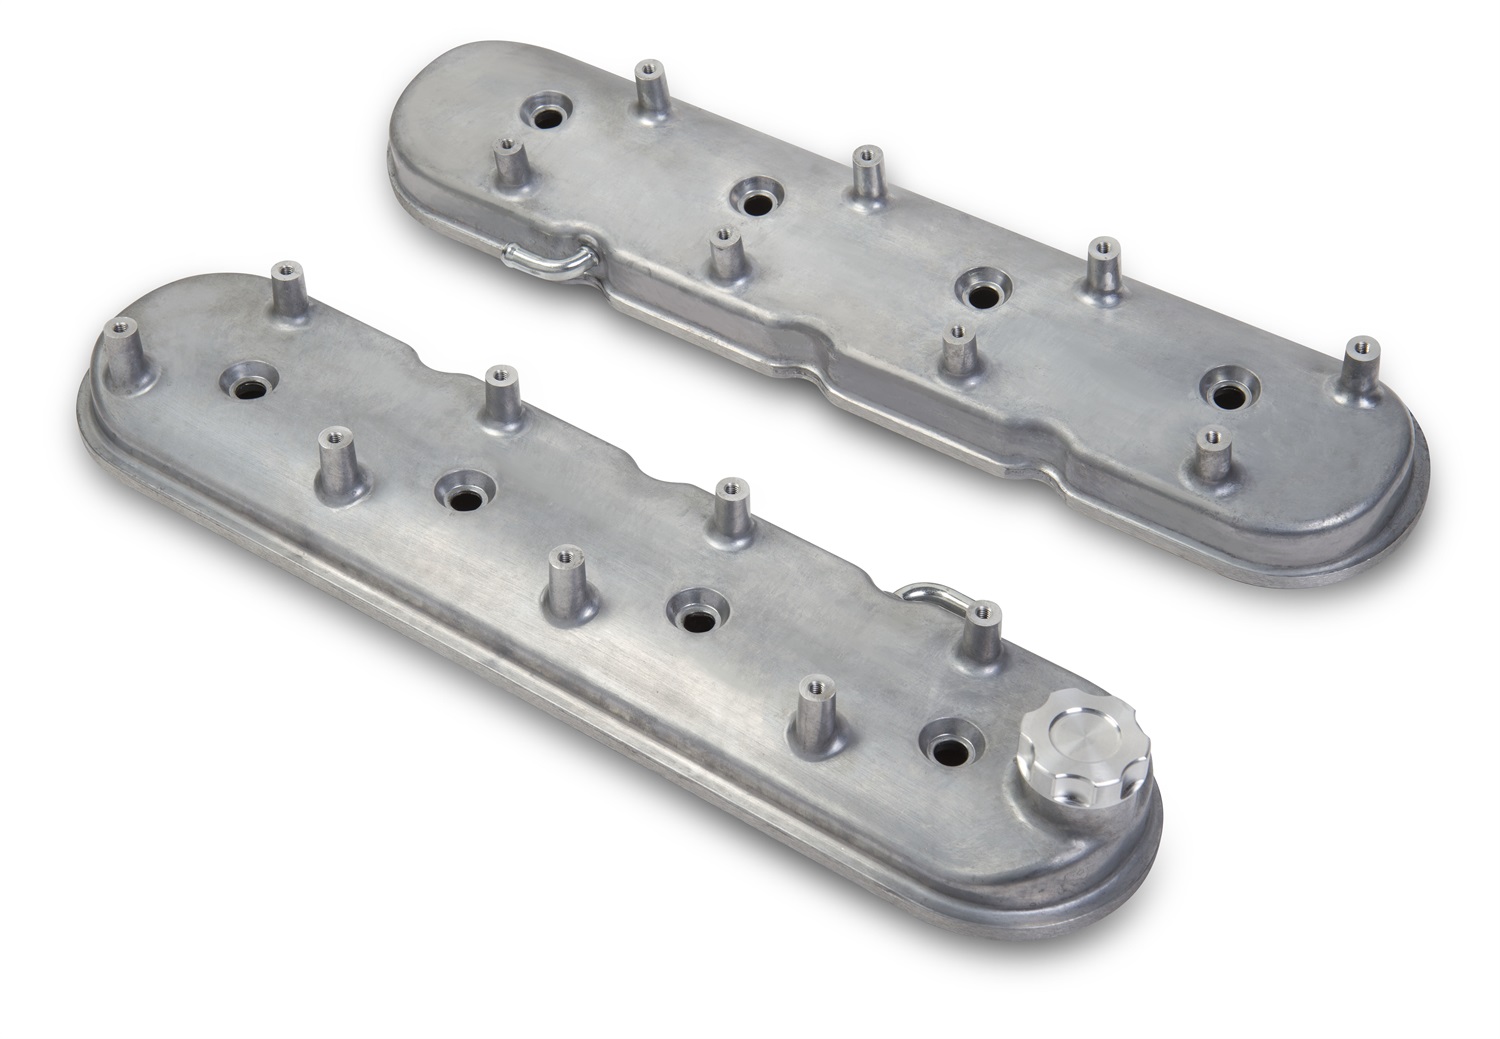 Holley Performance Holley Performance 241-88 LS Valve Cover Fits 97-11 Camaro Corvette